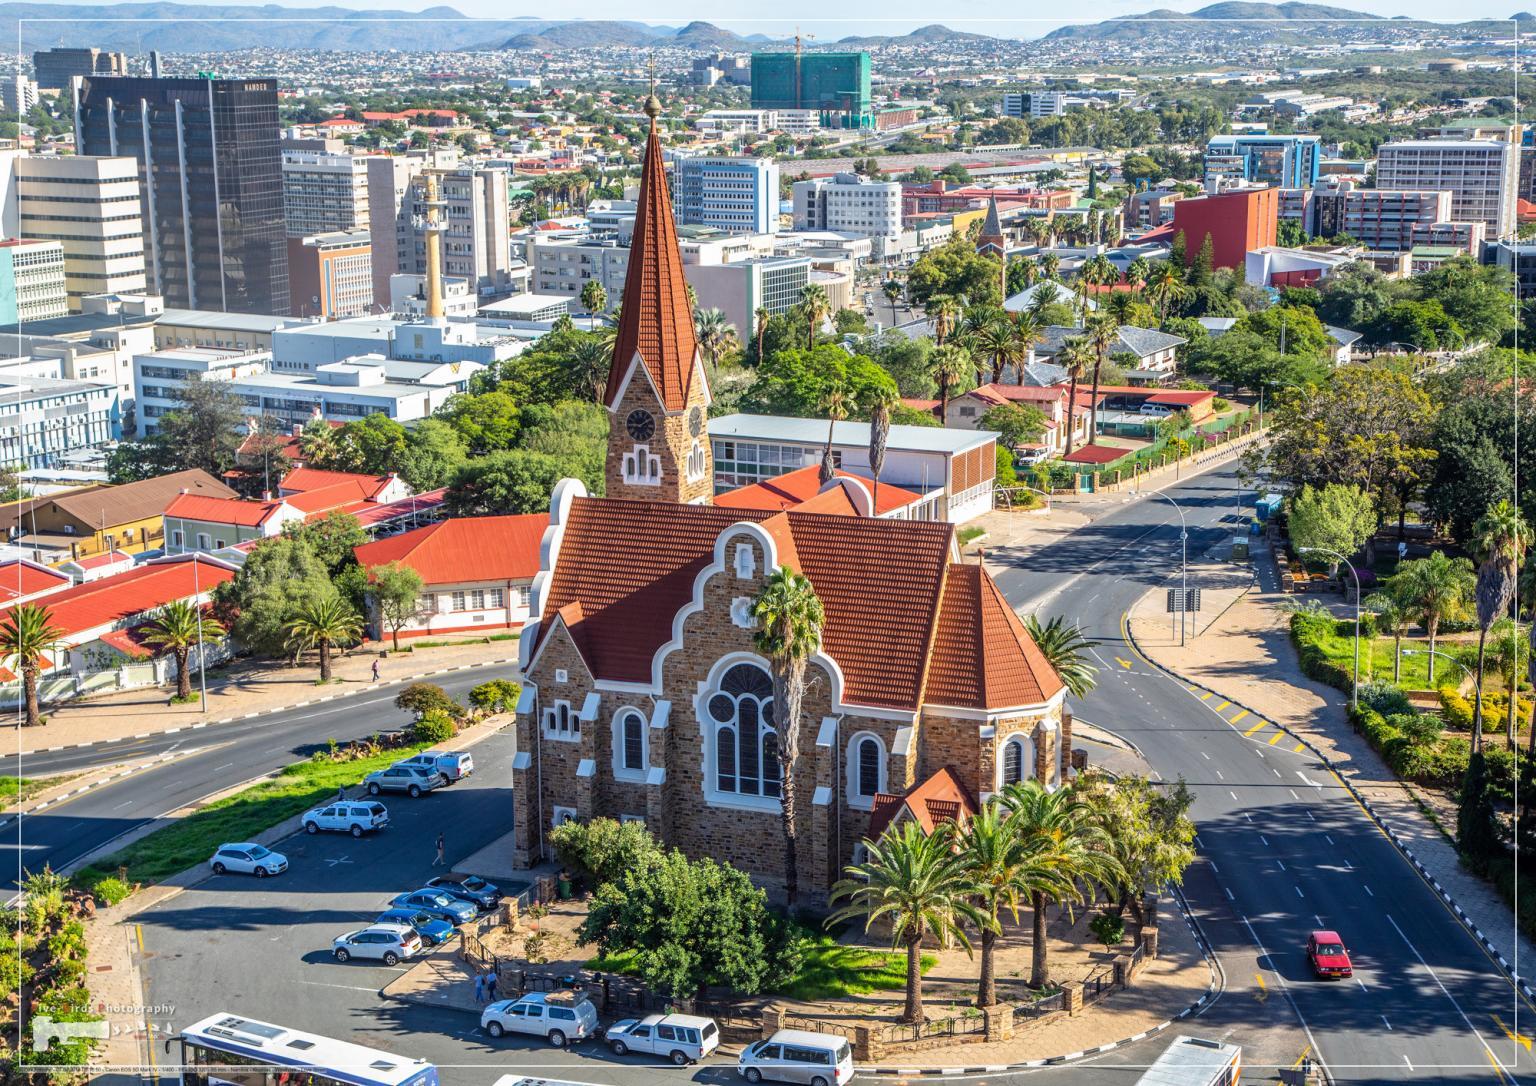 The famous Christ Church in Namibia's capital Windhoek